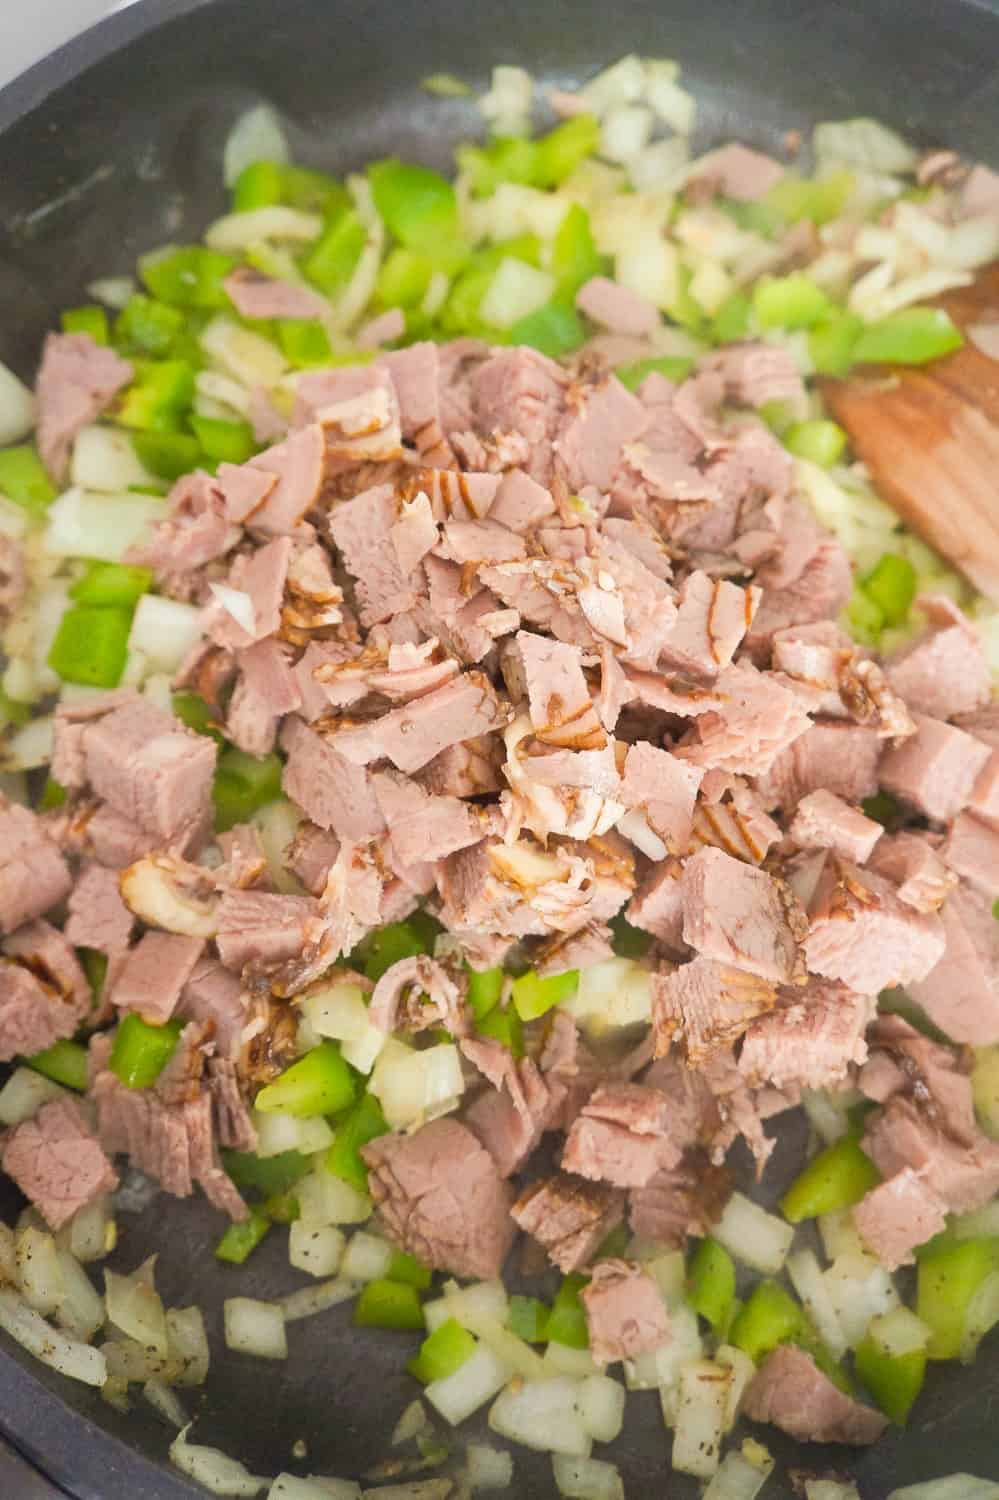 chopped roast beef added to diced green peppers and diced onions in a frying pan